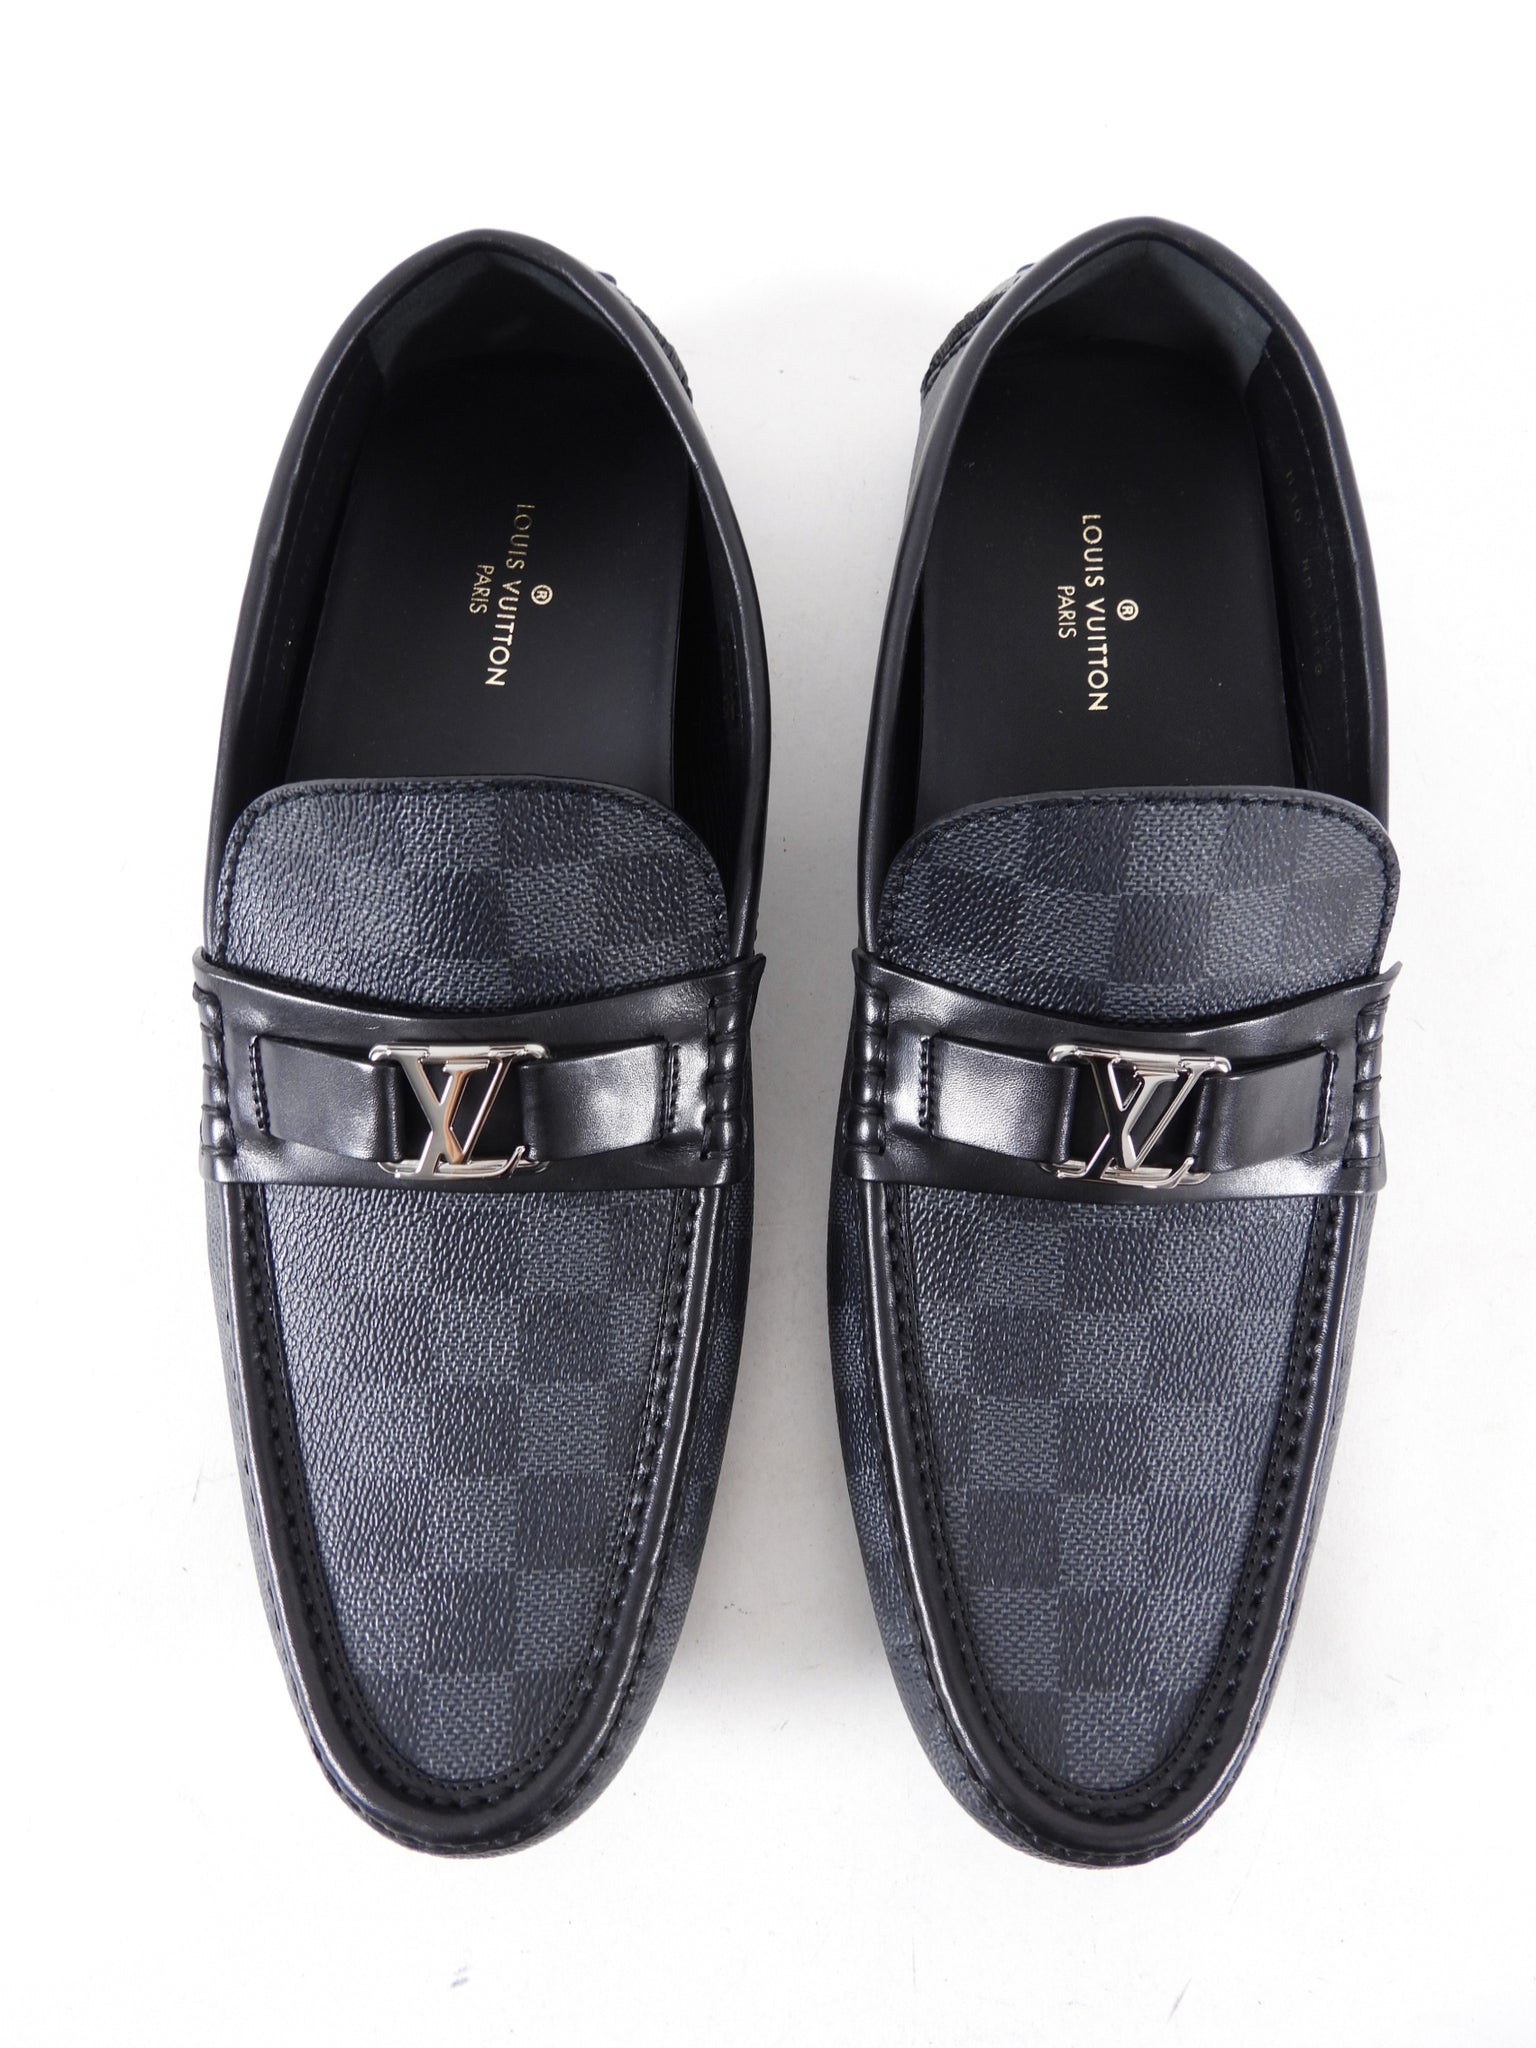 Louis Vuitton Damier Embossed Leather Hockenheim Slip on Loafers Size 43.5